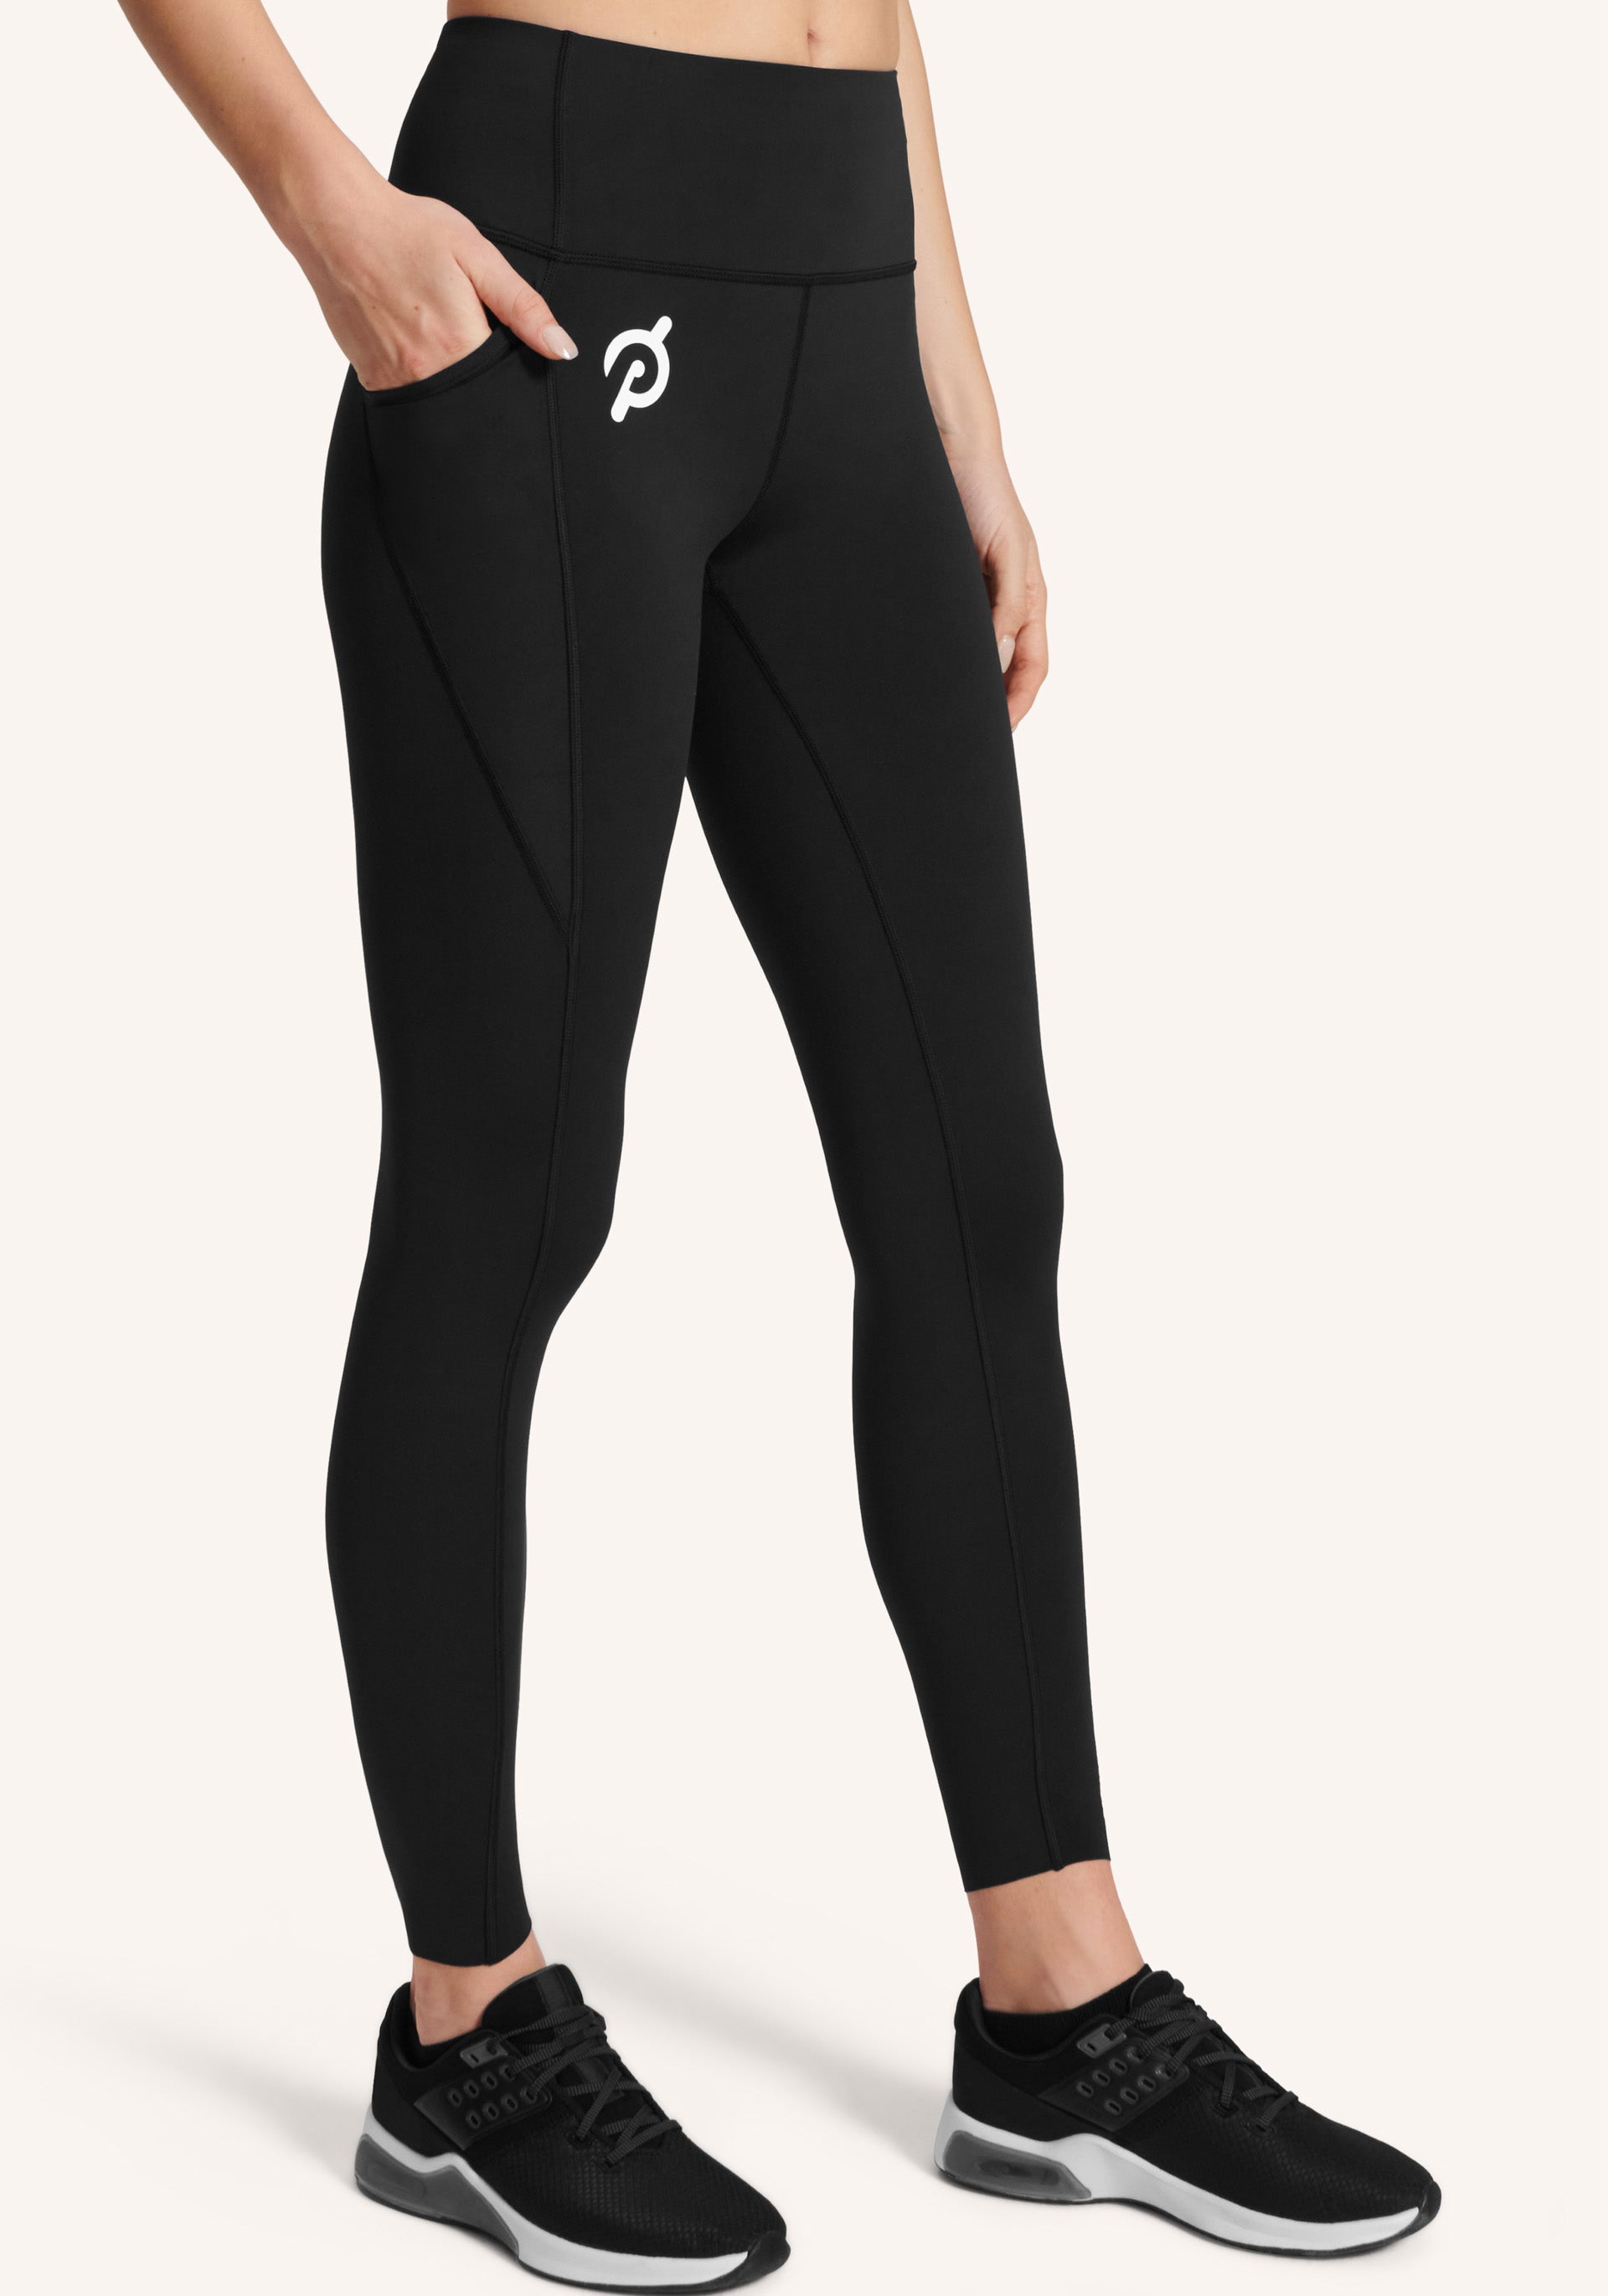 These are the BEST! Peloton sports bra & leggings 15% off on  ri